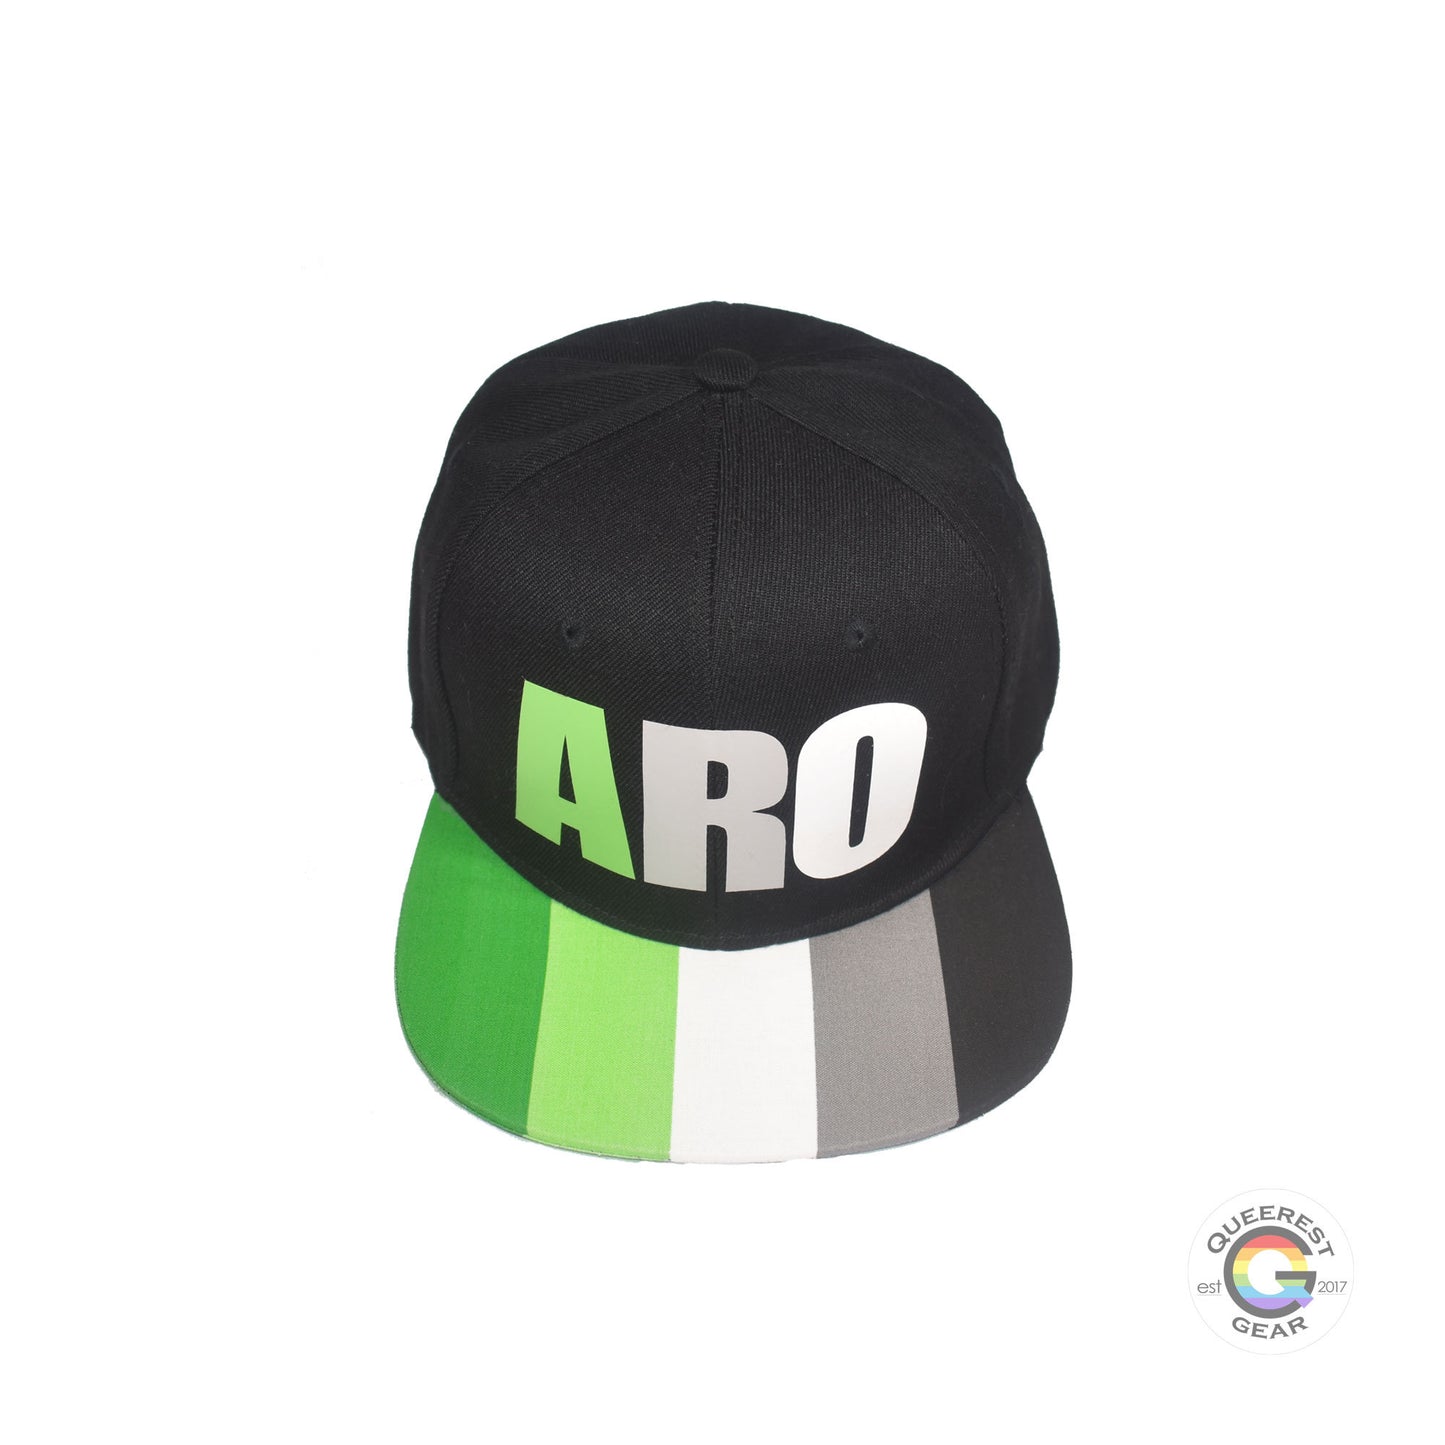 Black flat bill snapback hat. The brim has the aromantic pride flag on both sides and the front of the hat has the word “ARO” in green, grey, and white. Front top view